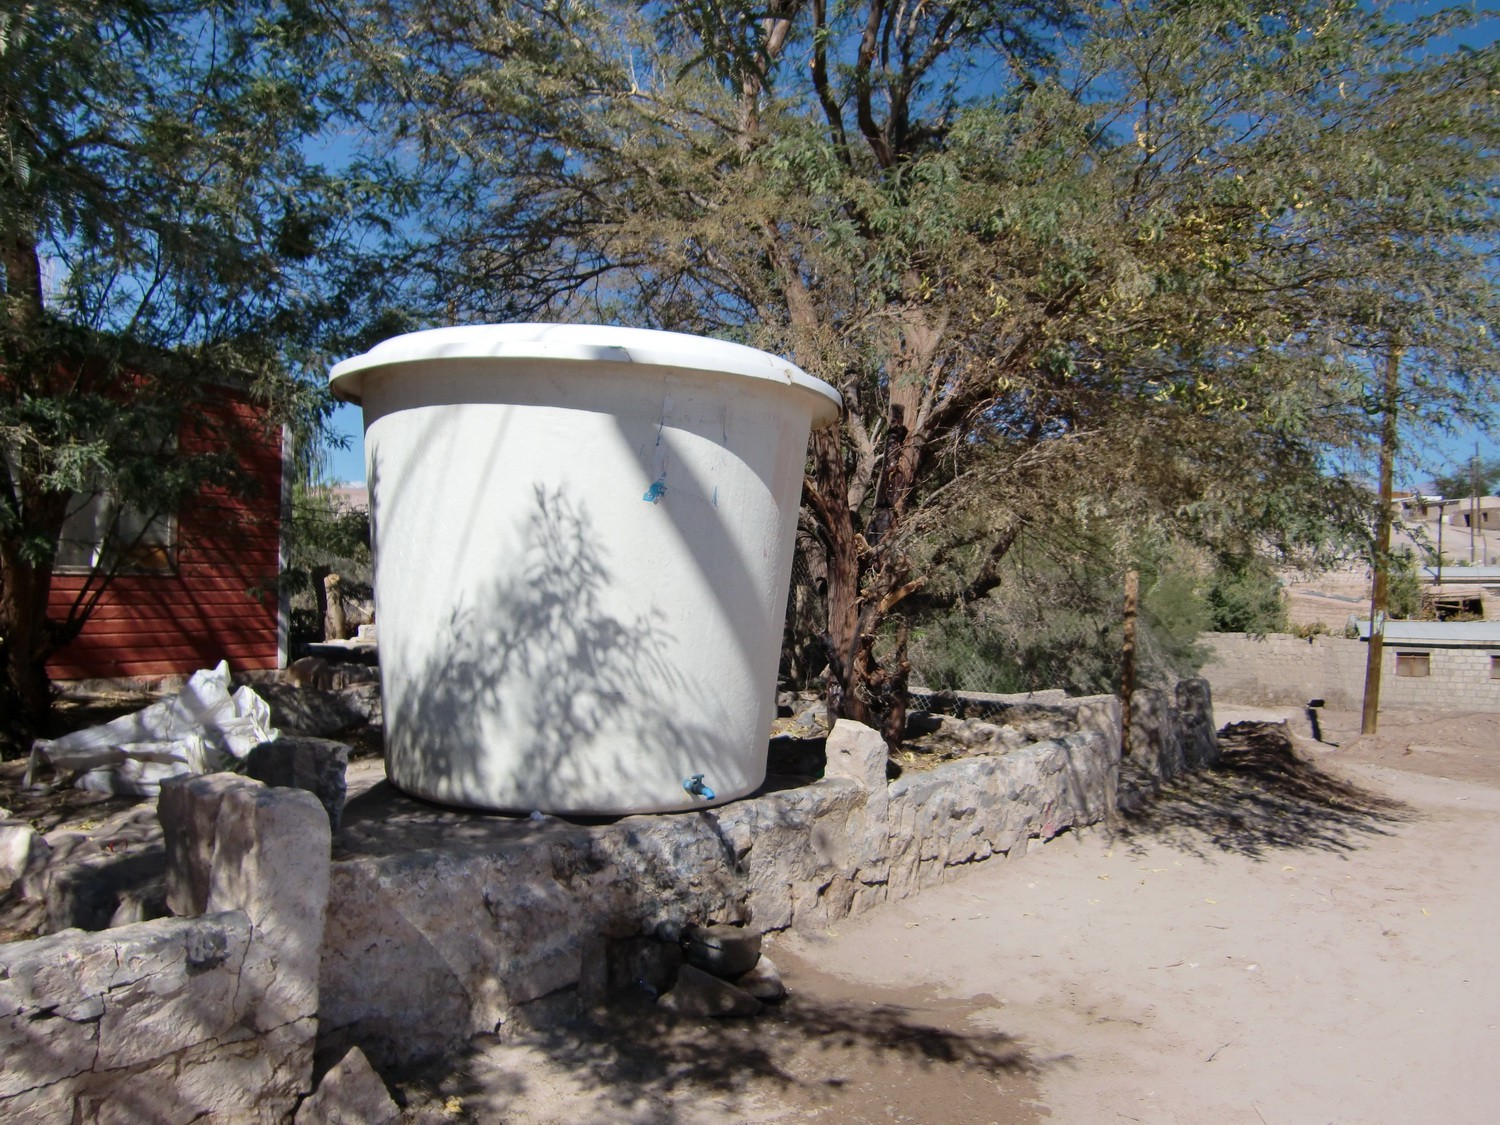 Water supply in Tocona